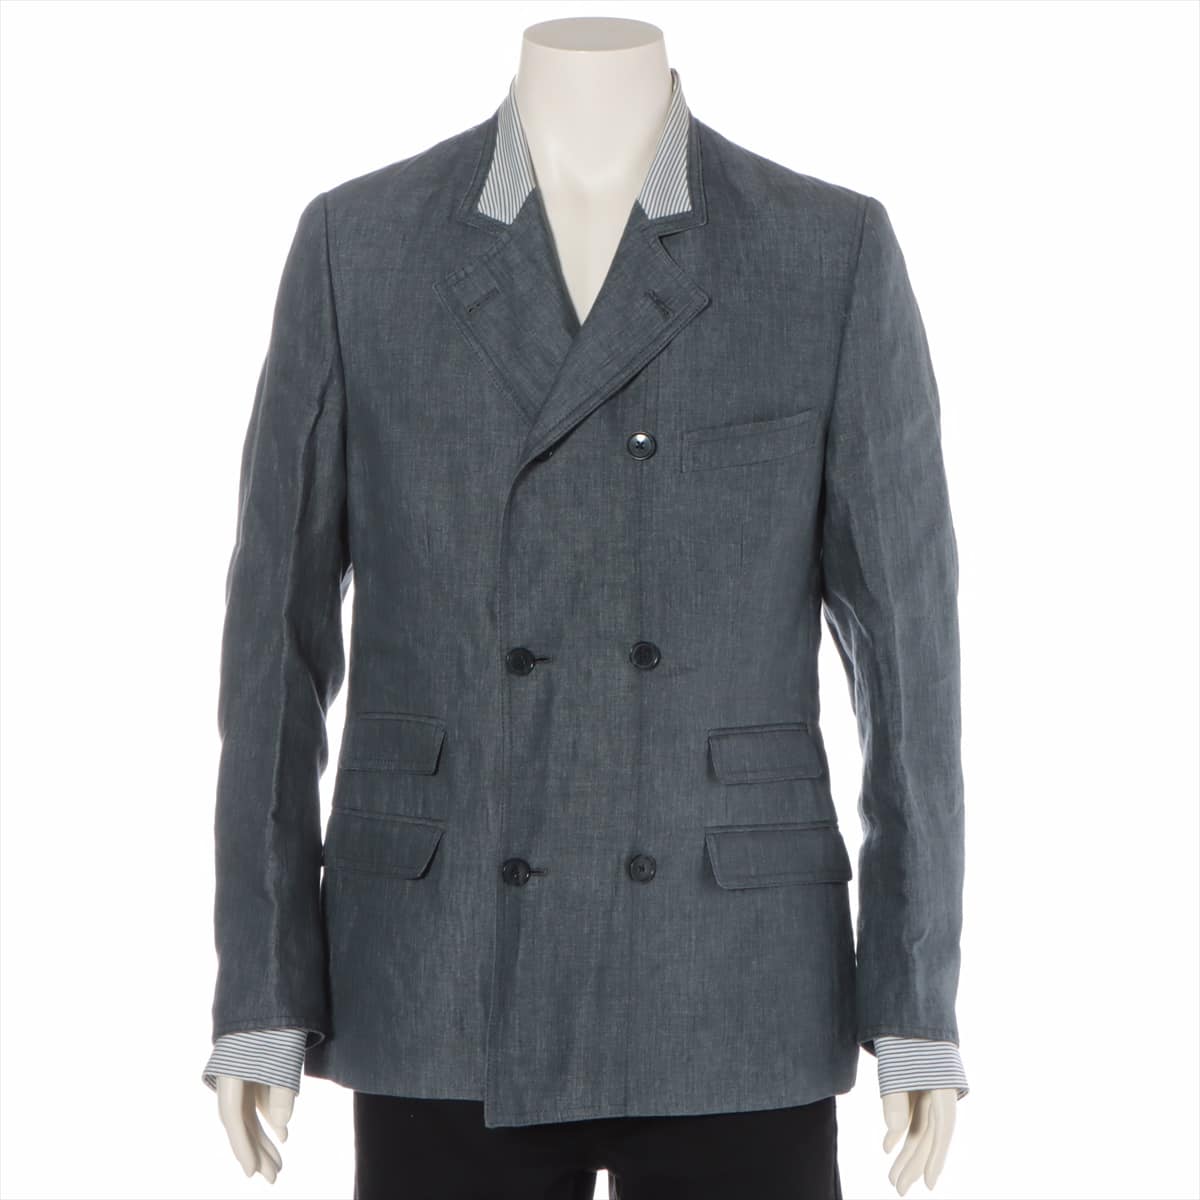 Dolce & Gabbana Linen Tailored jacket 48 Men's Grey  Layered sleeves are removable